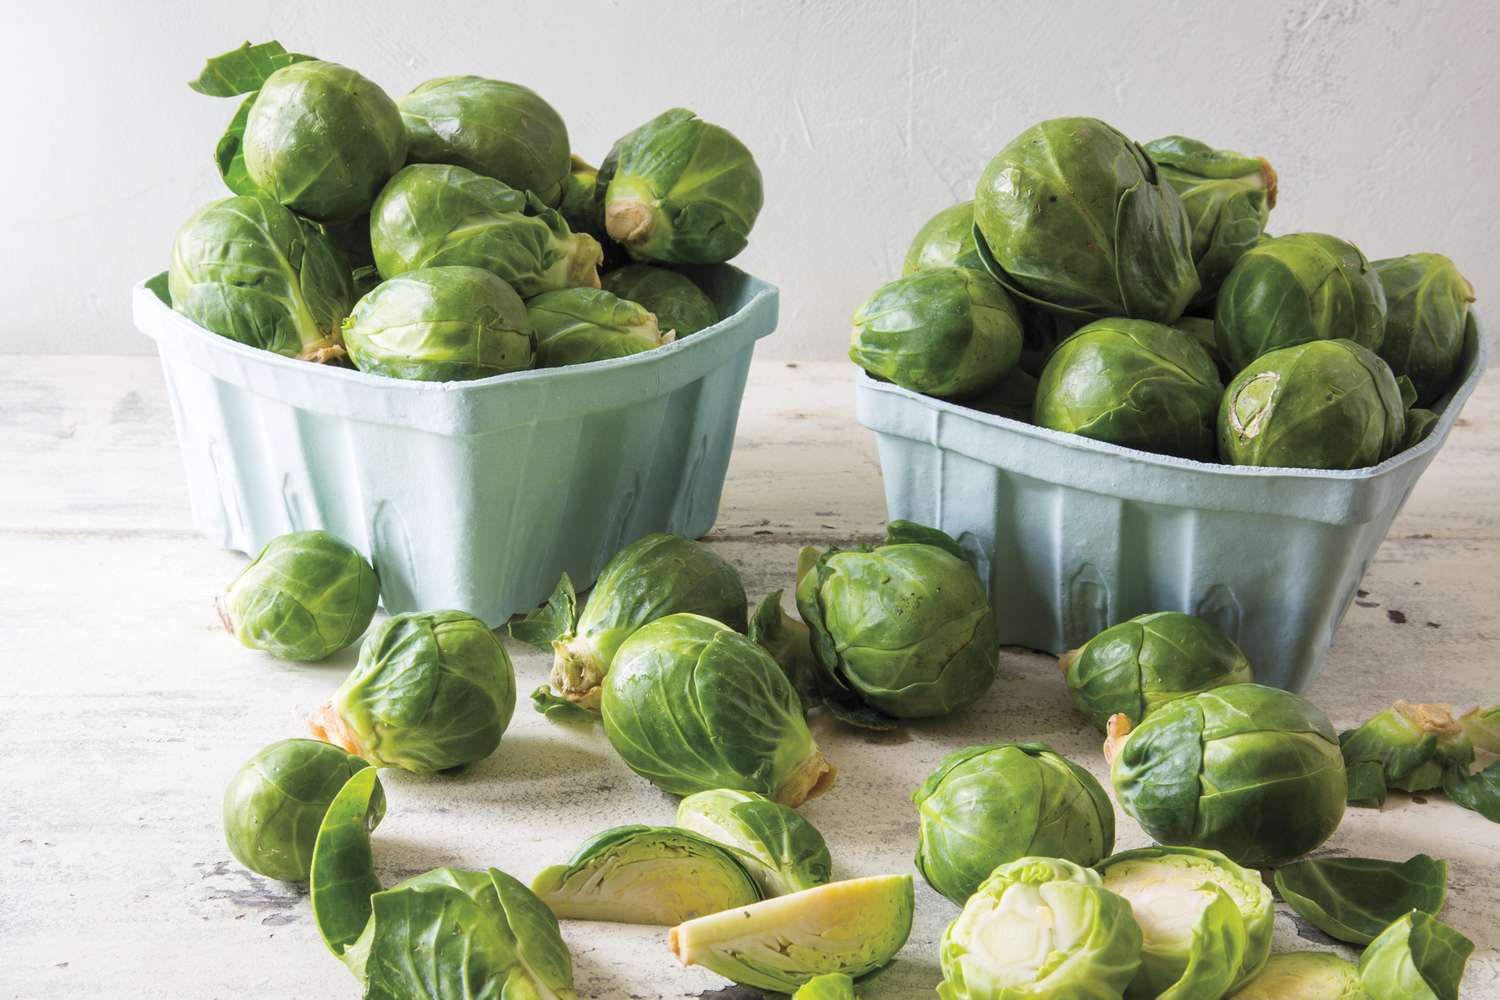 How Long Do Brussels Sprouts Last?